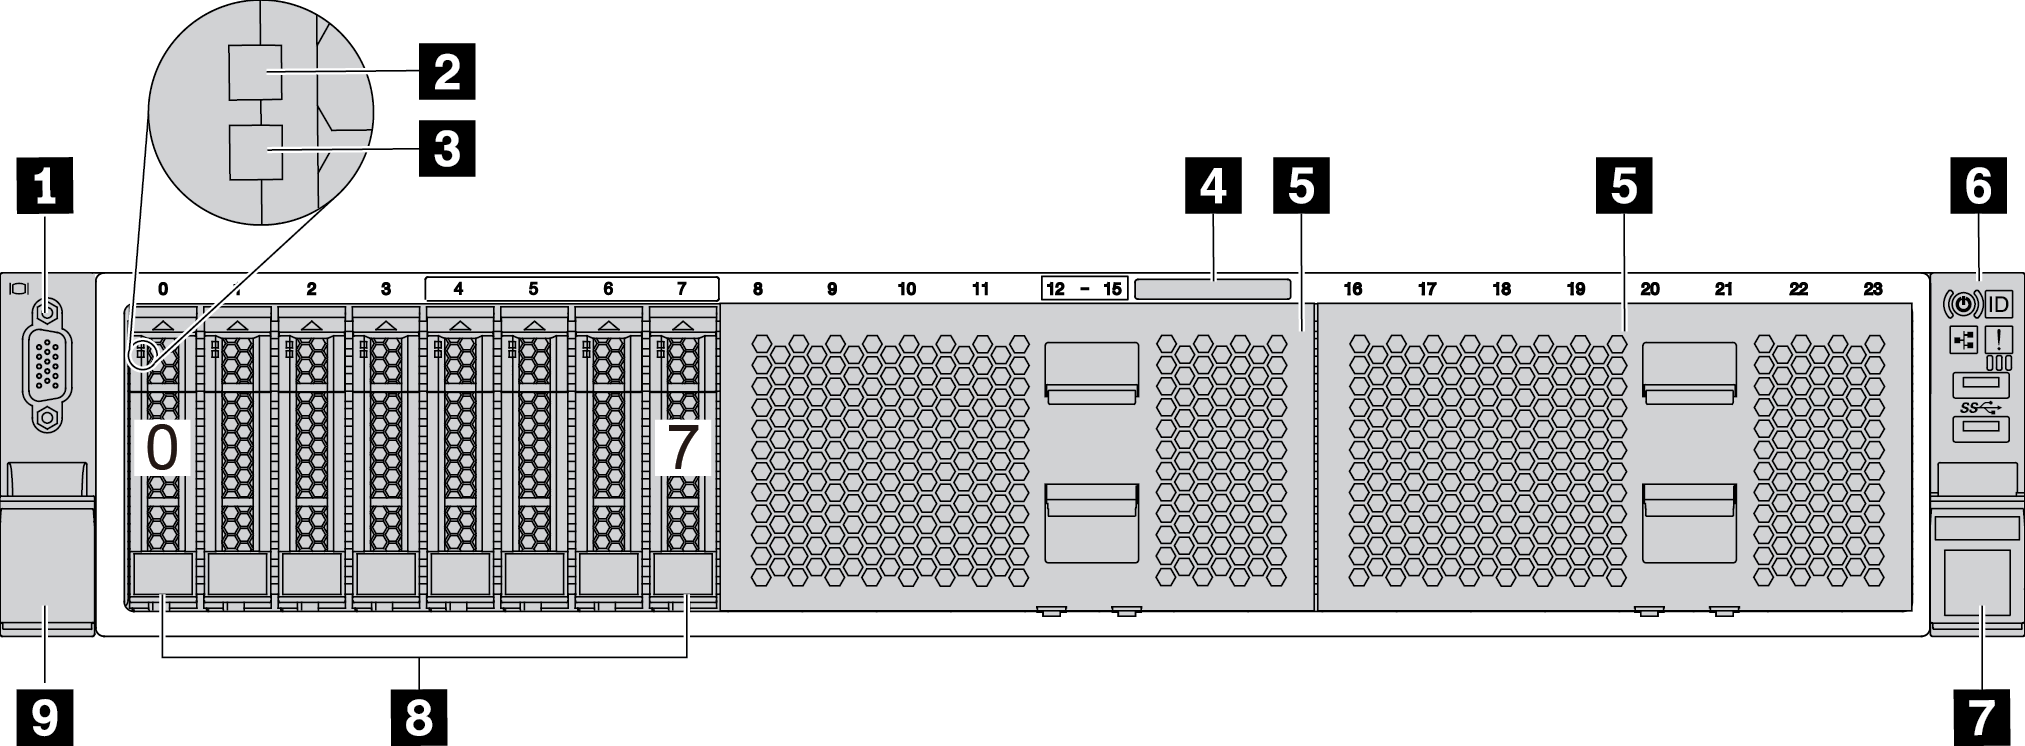 Front view of server models with eight 2.5-inch drive bays